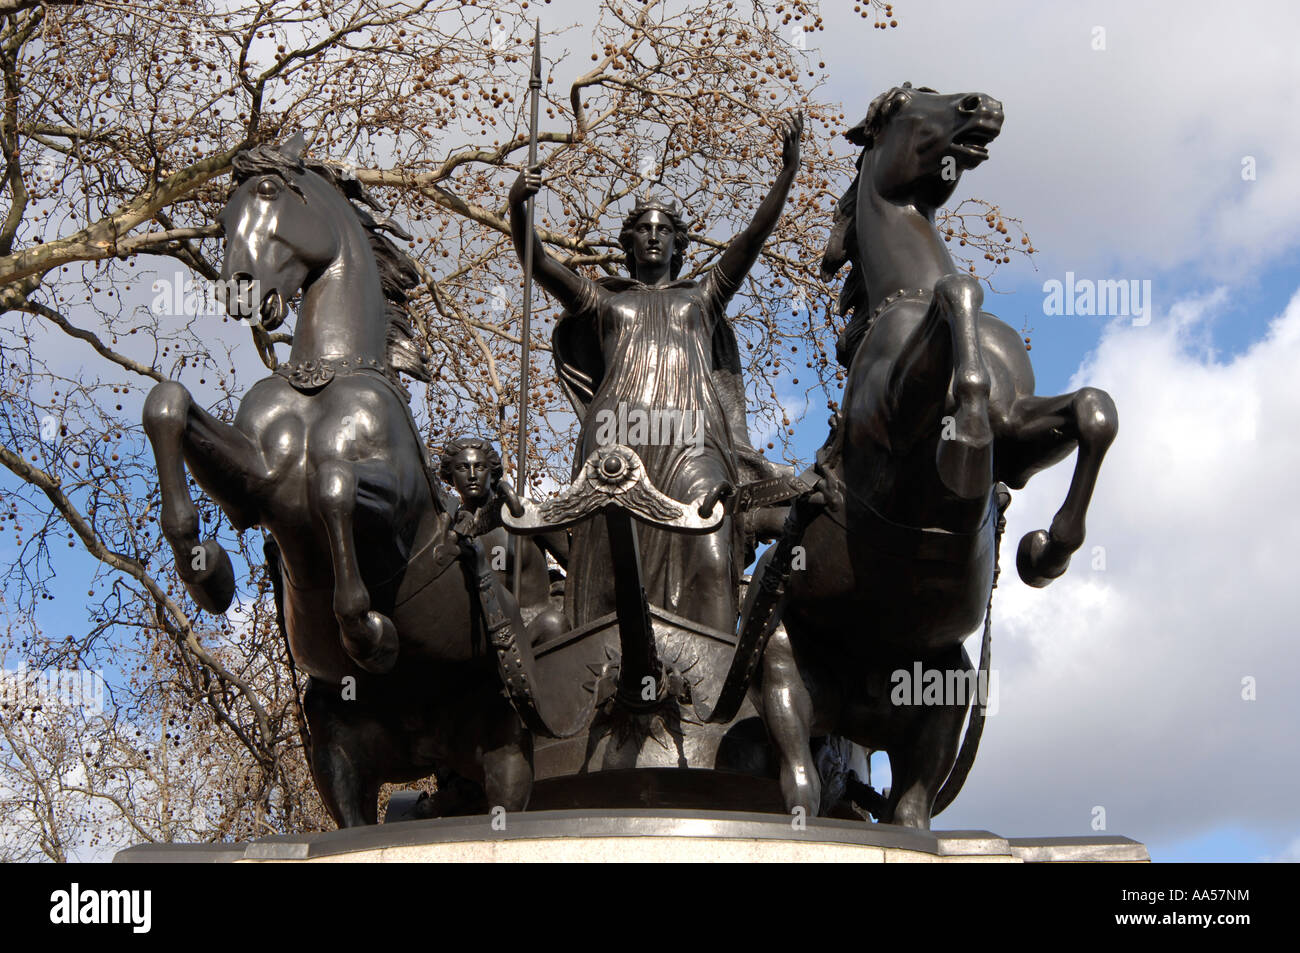 Boadicea and Her Daughters Statue, Westminster, London, UK. Boudicca Queen of the Iceni tribe of Britons, rebelled against Roman rule. Stock Photo